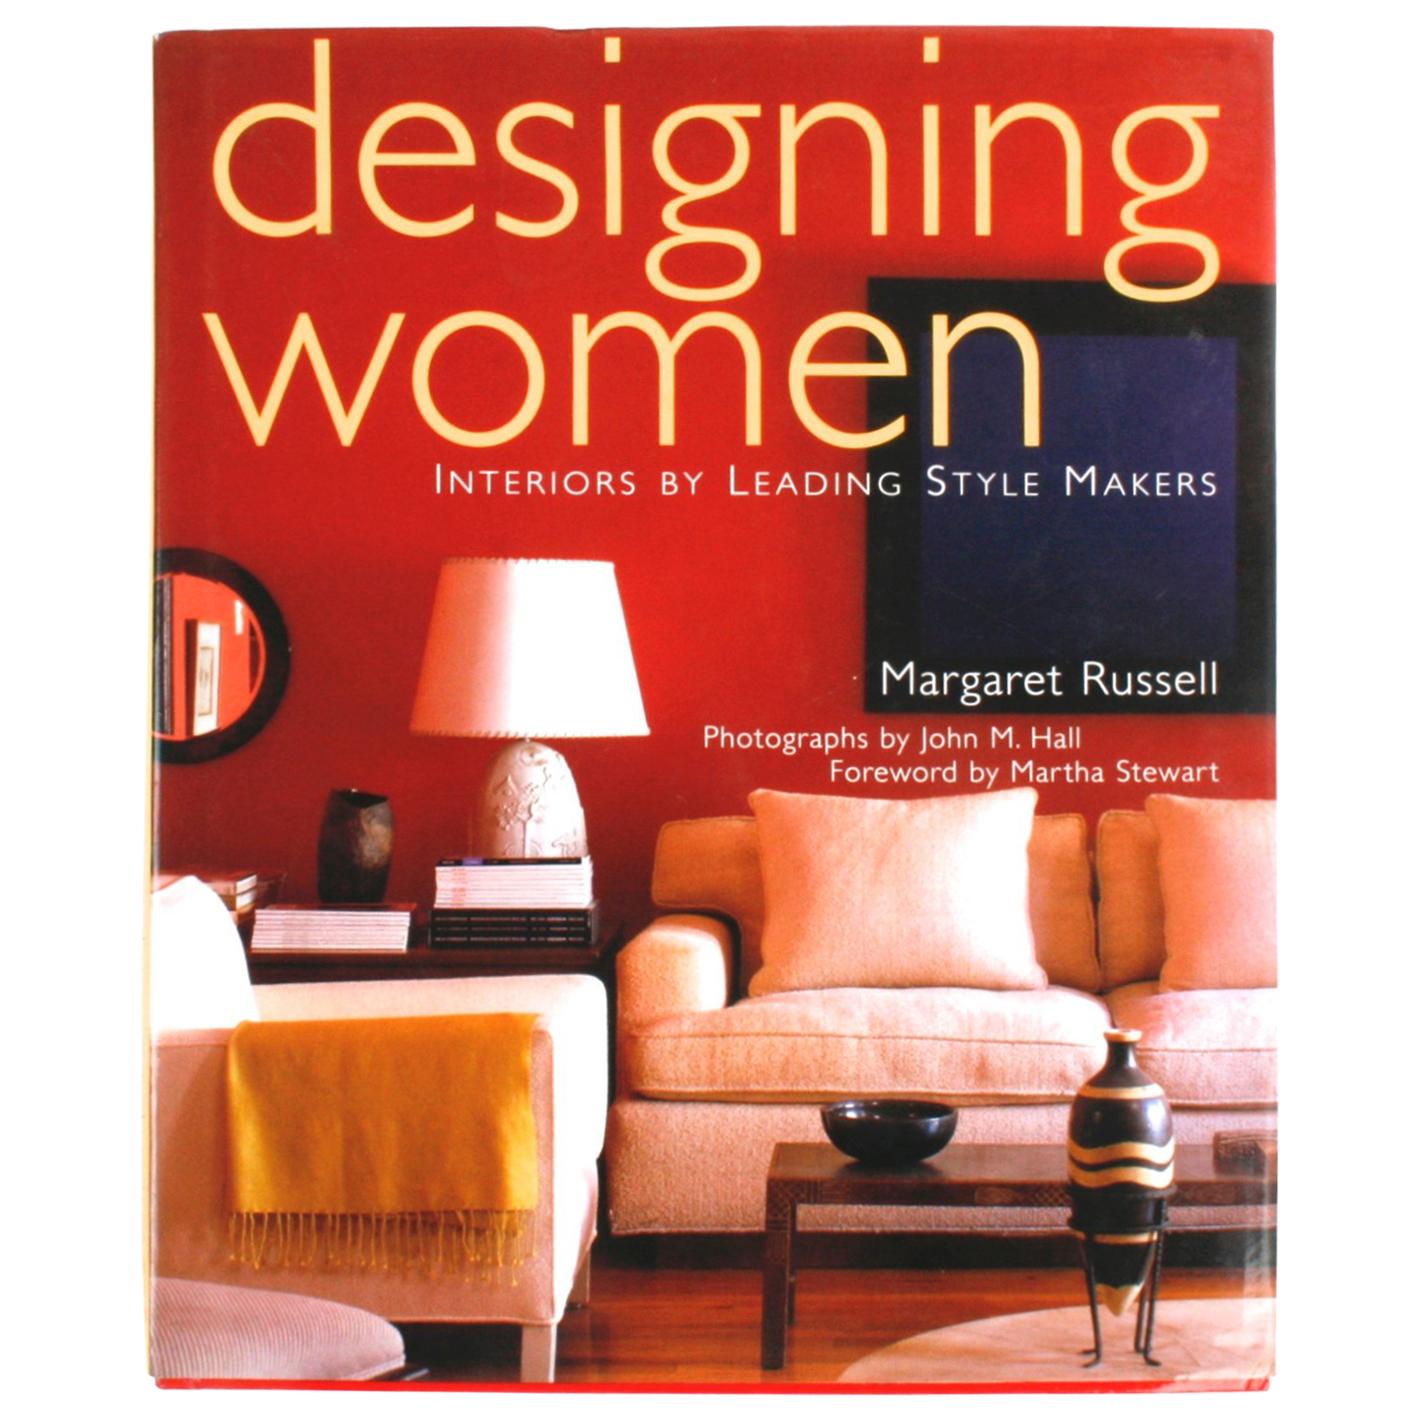 Designing Women, Interiors, Leading Style Makers, Margaret Russell, 1st Edition